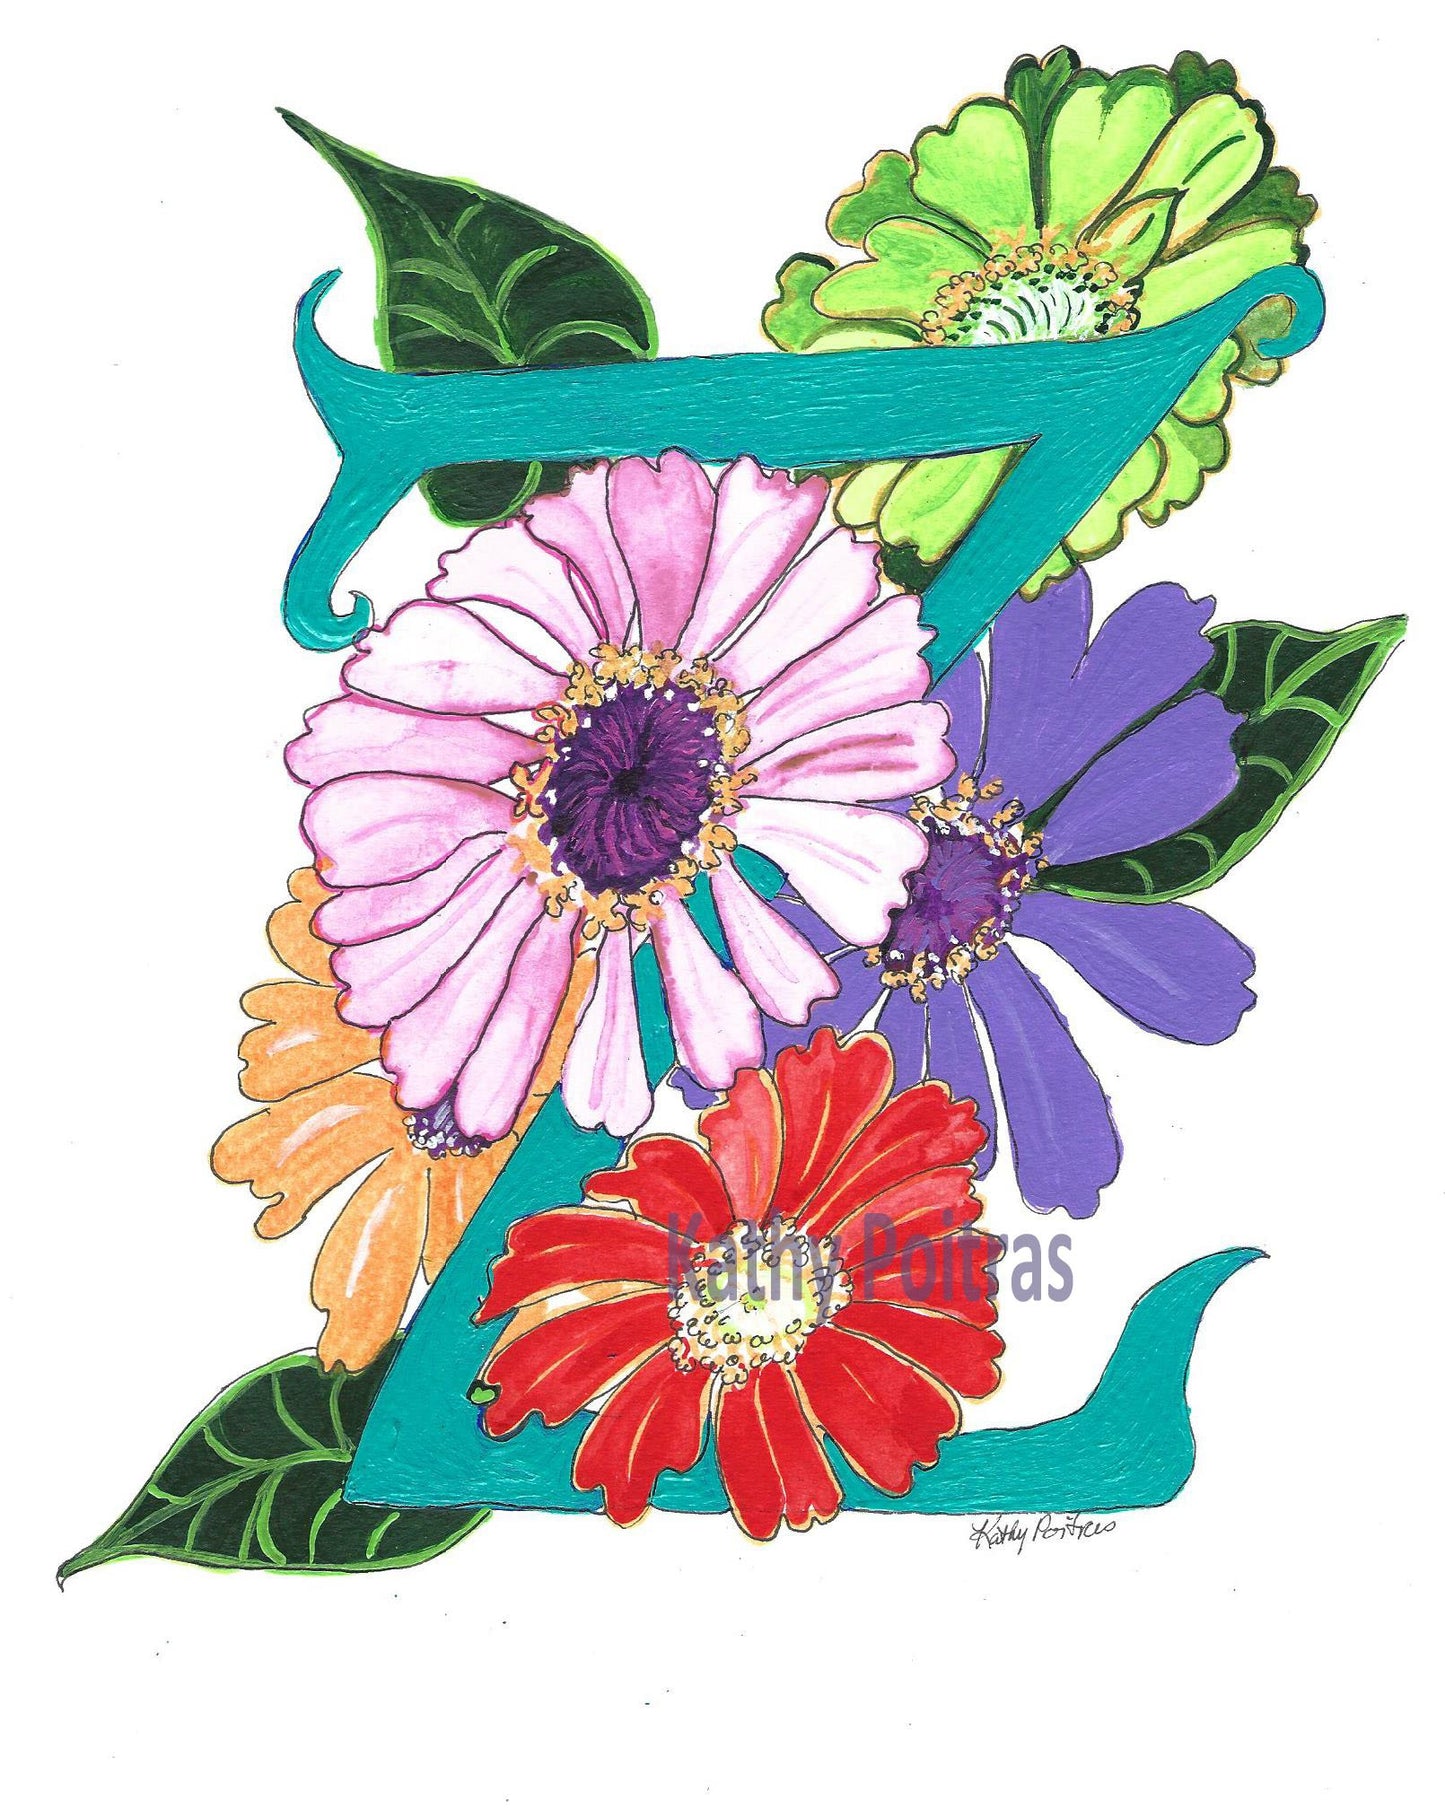 Hand made photographic Personalized Greeting Card. Illustrated Letter Z is for Zinnia Flowers by artist Kathy Poitras. Blank inside